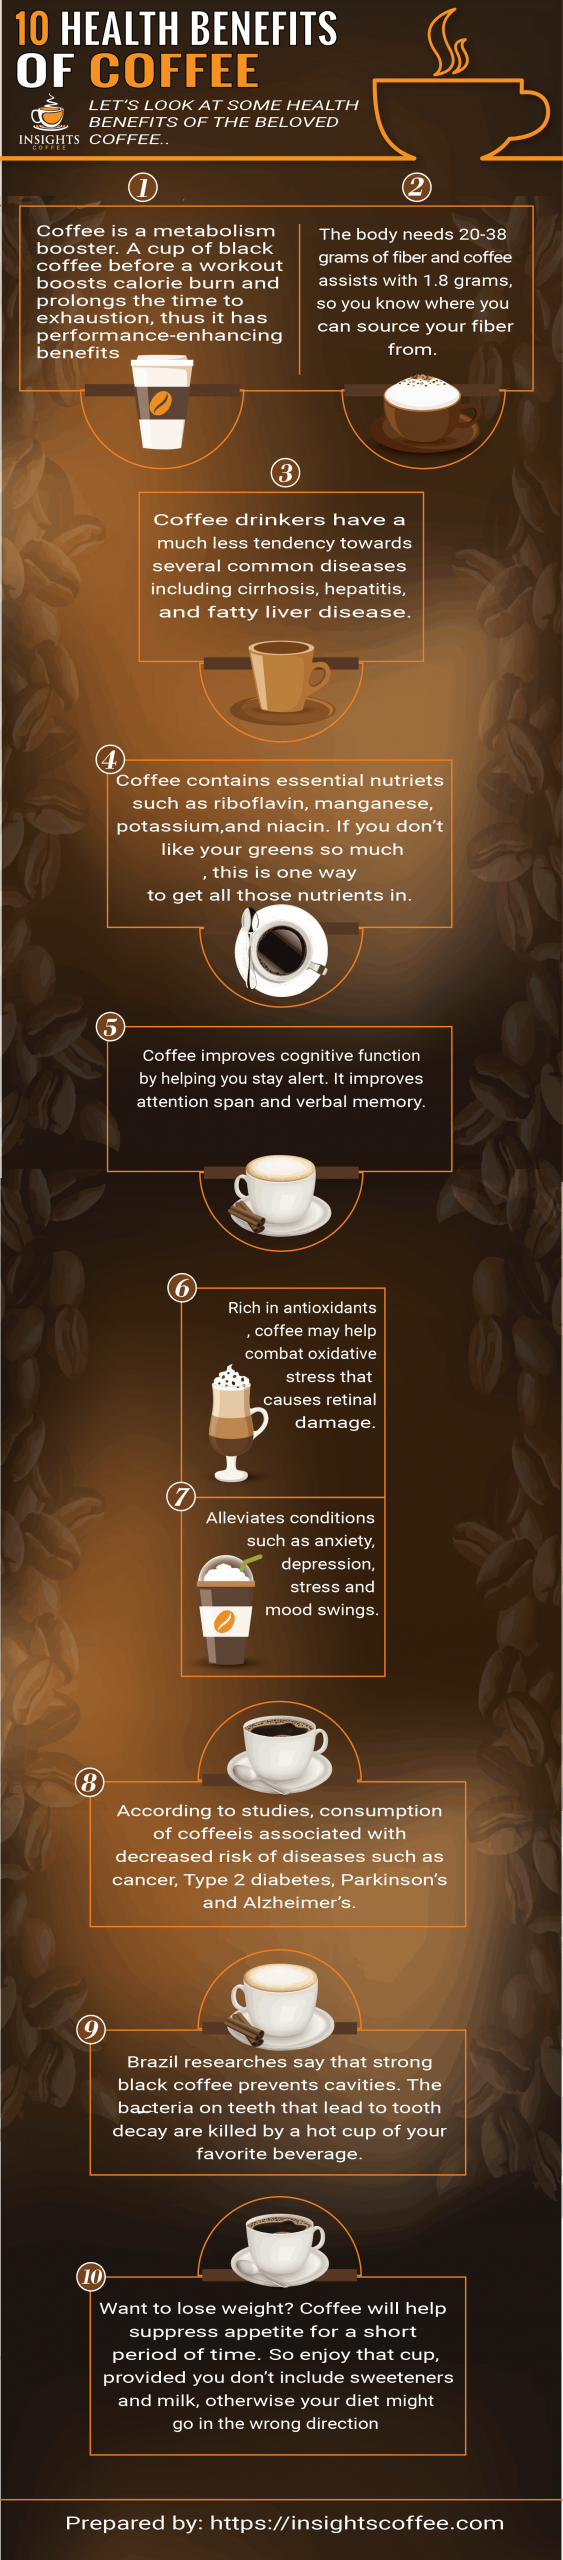 The Many Health Benefits Of Coffee